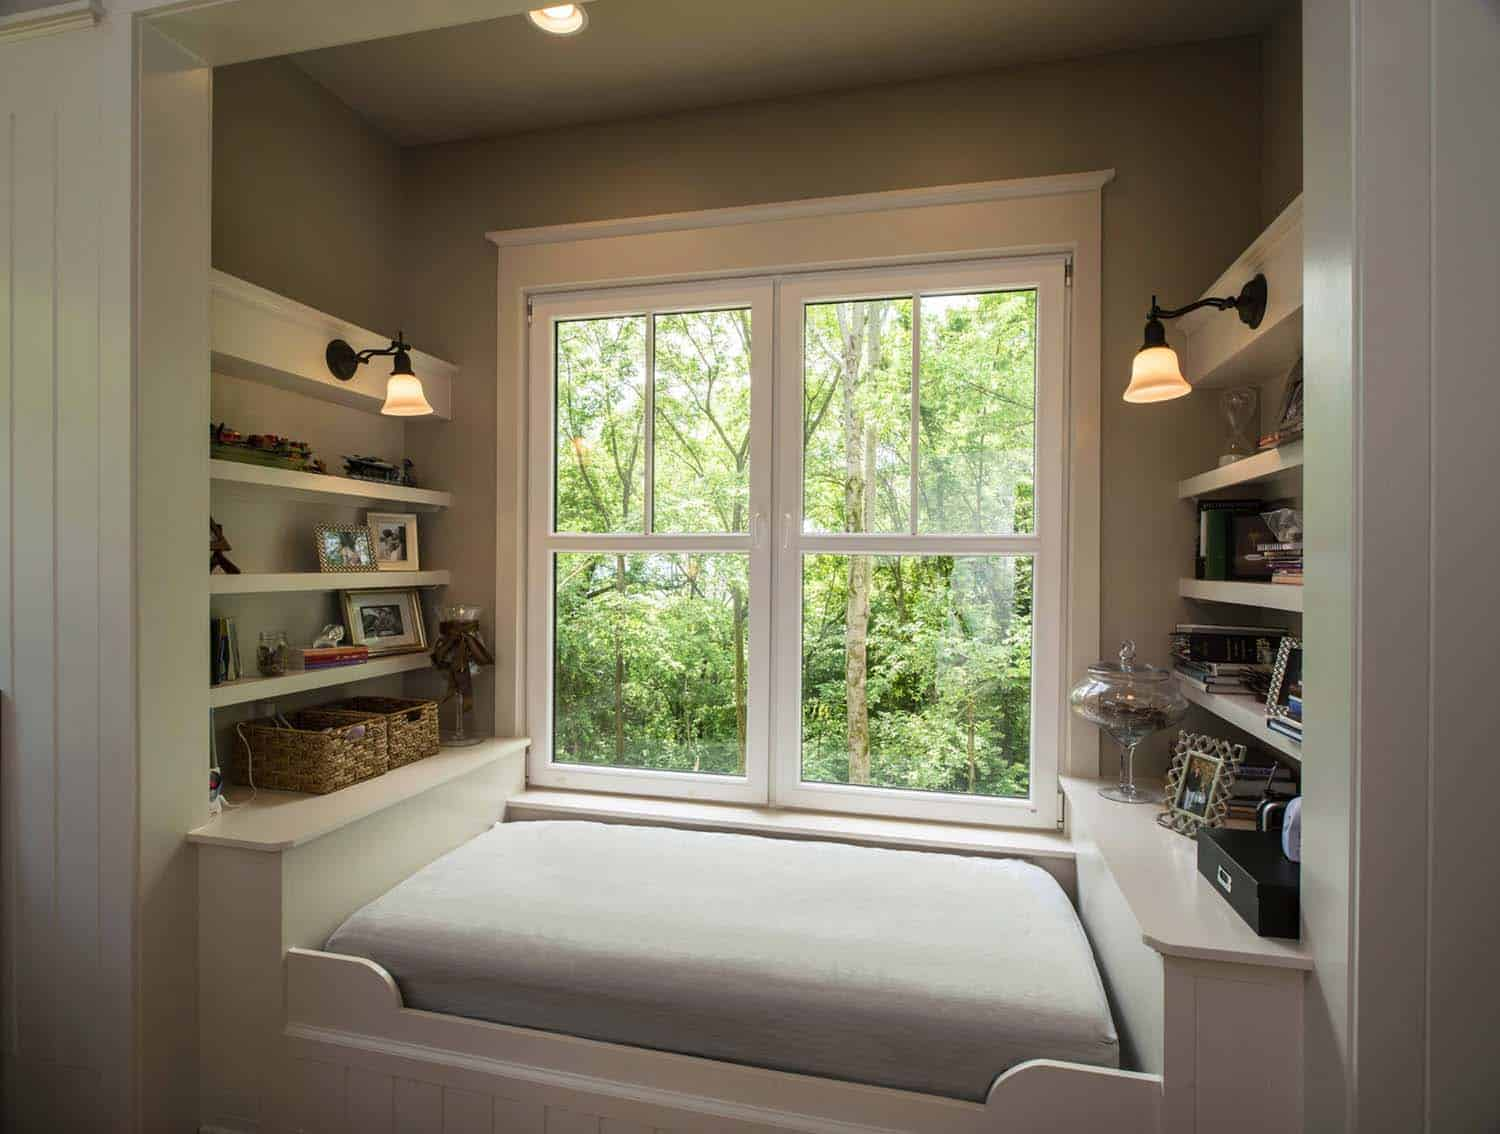 Create a cozy window nook for reading or gazing out at your favorite part of the garden, by positioning your bookcase bed below a window.